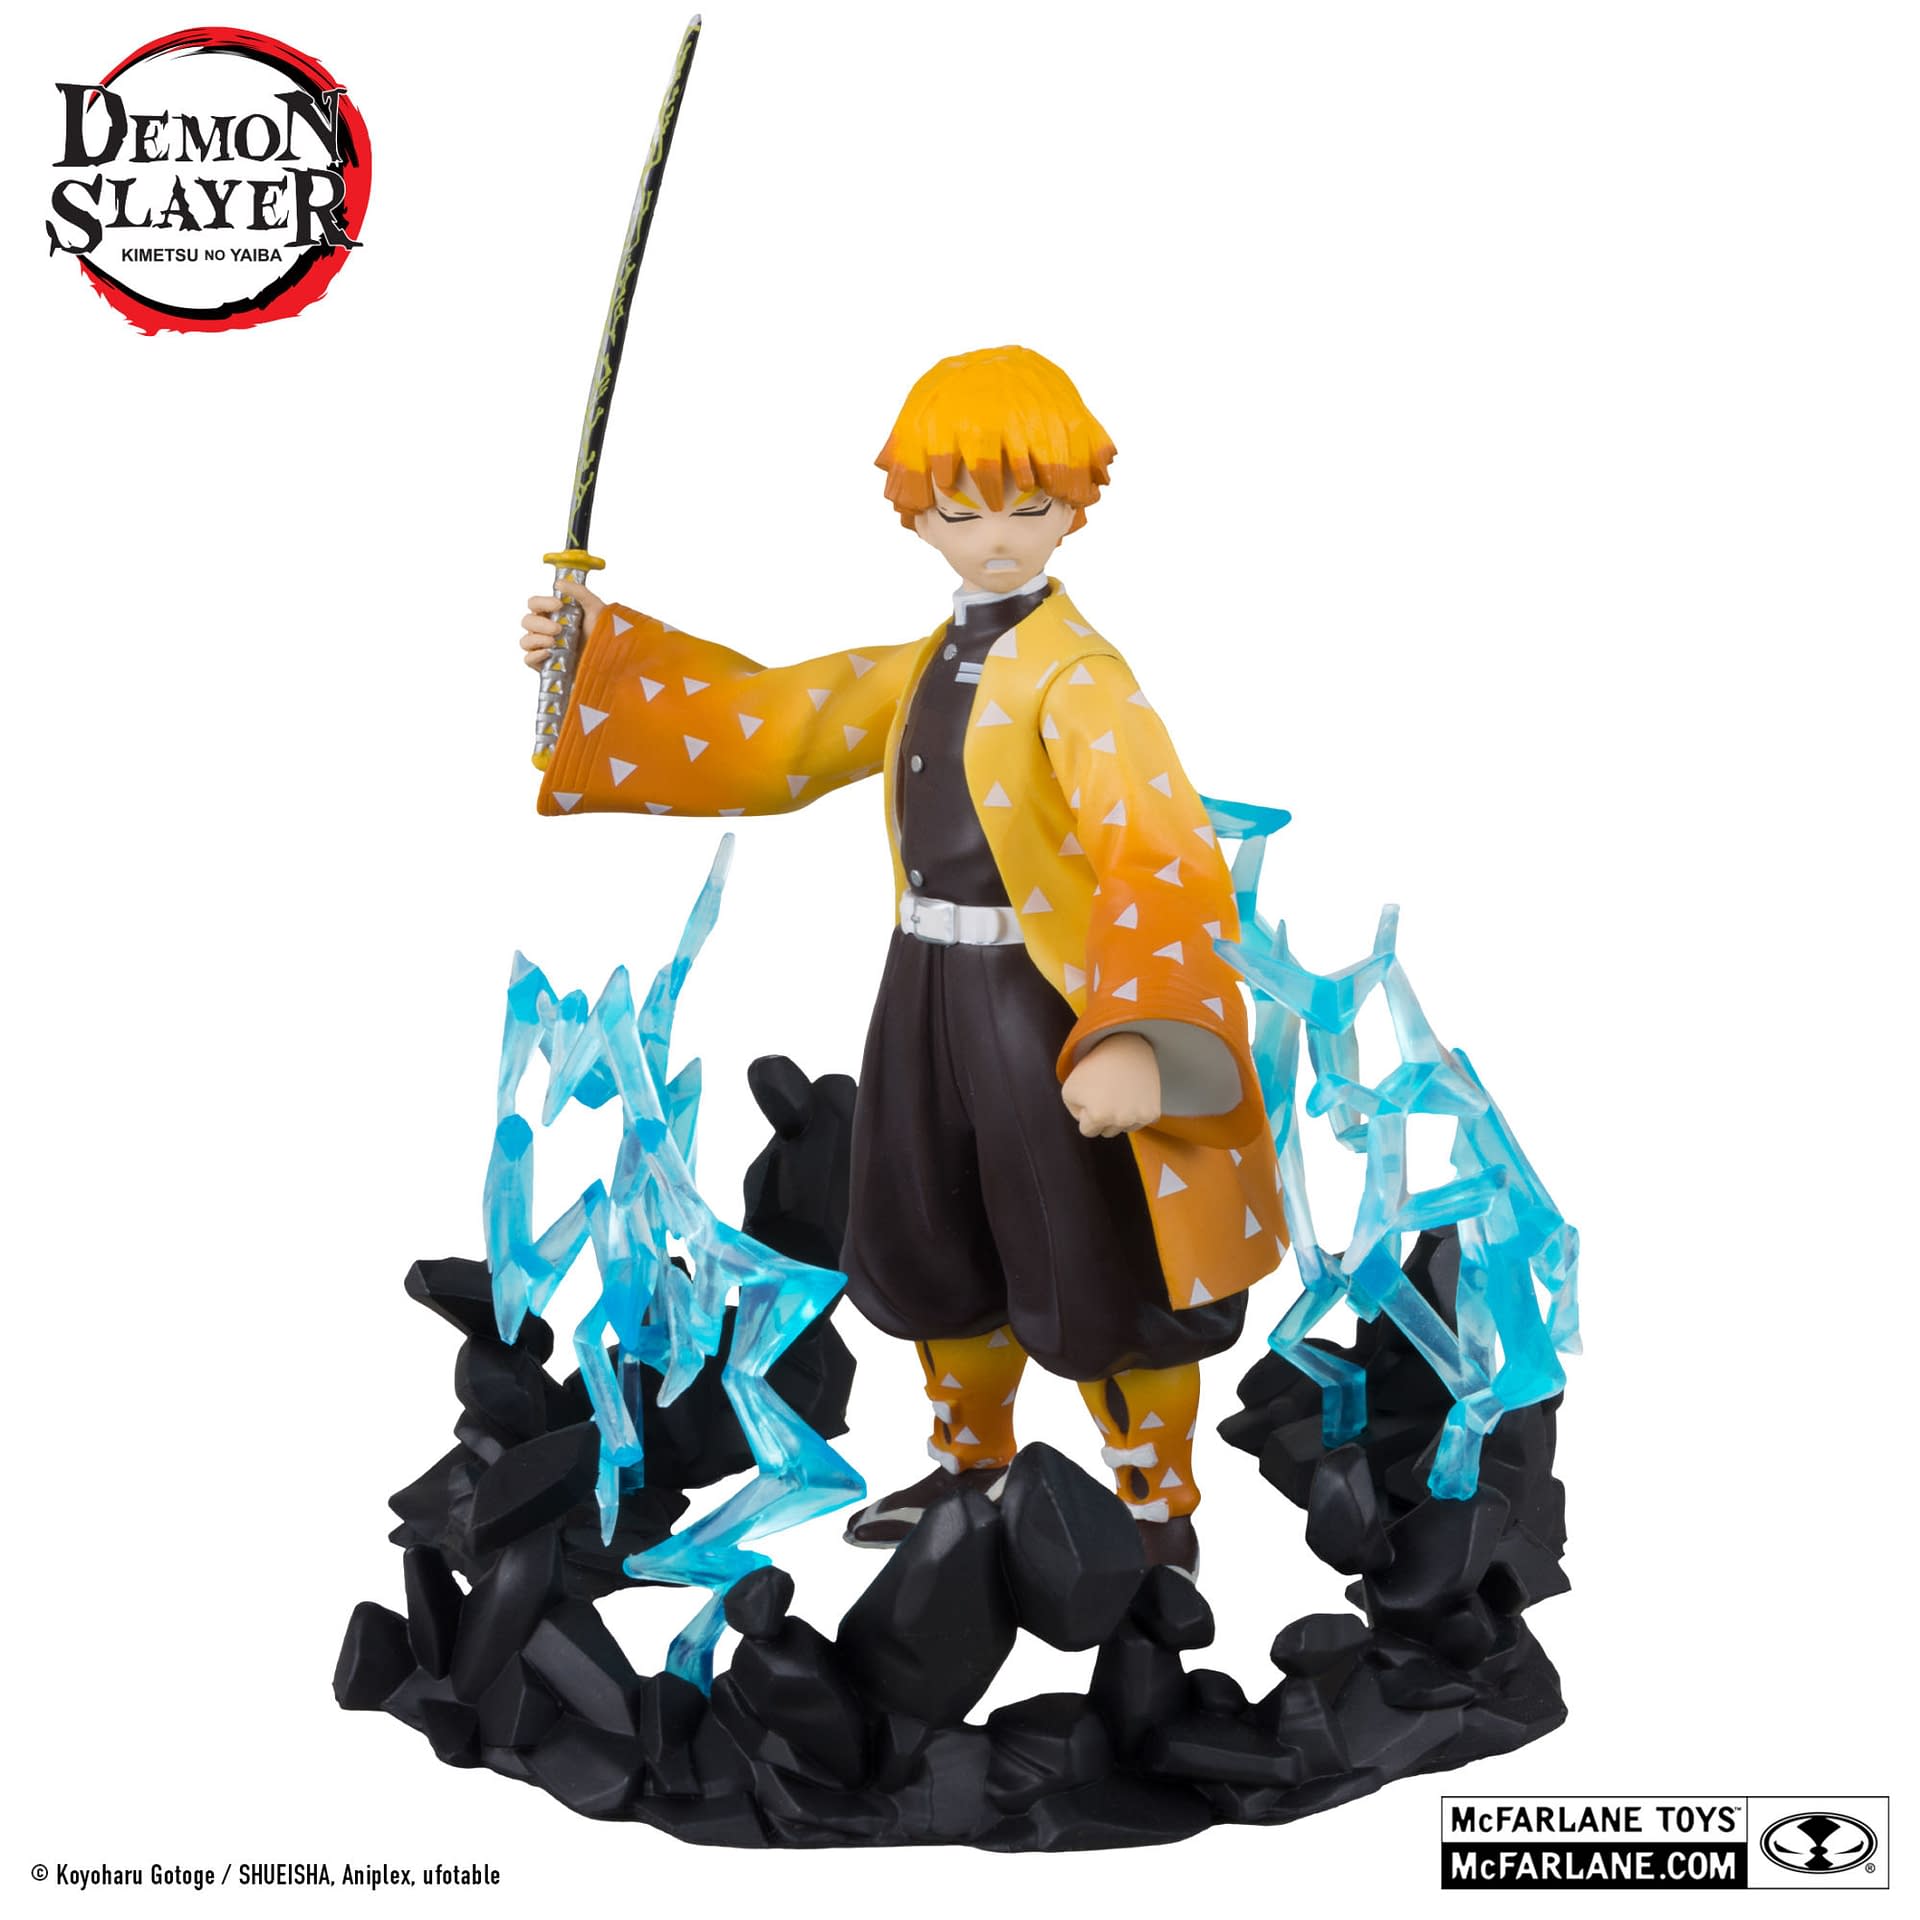 More Demon Slayer Figures Arrive at McFarlane Toys in 5" Scale